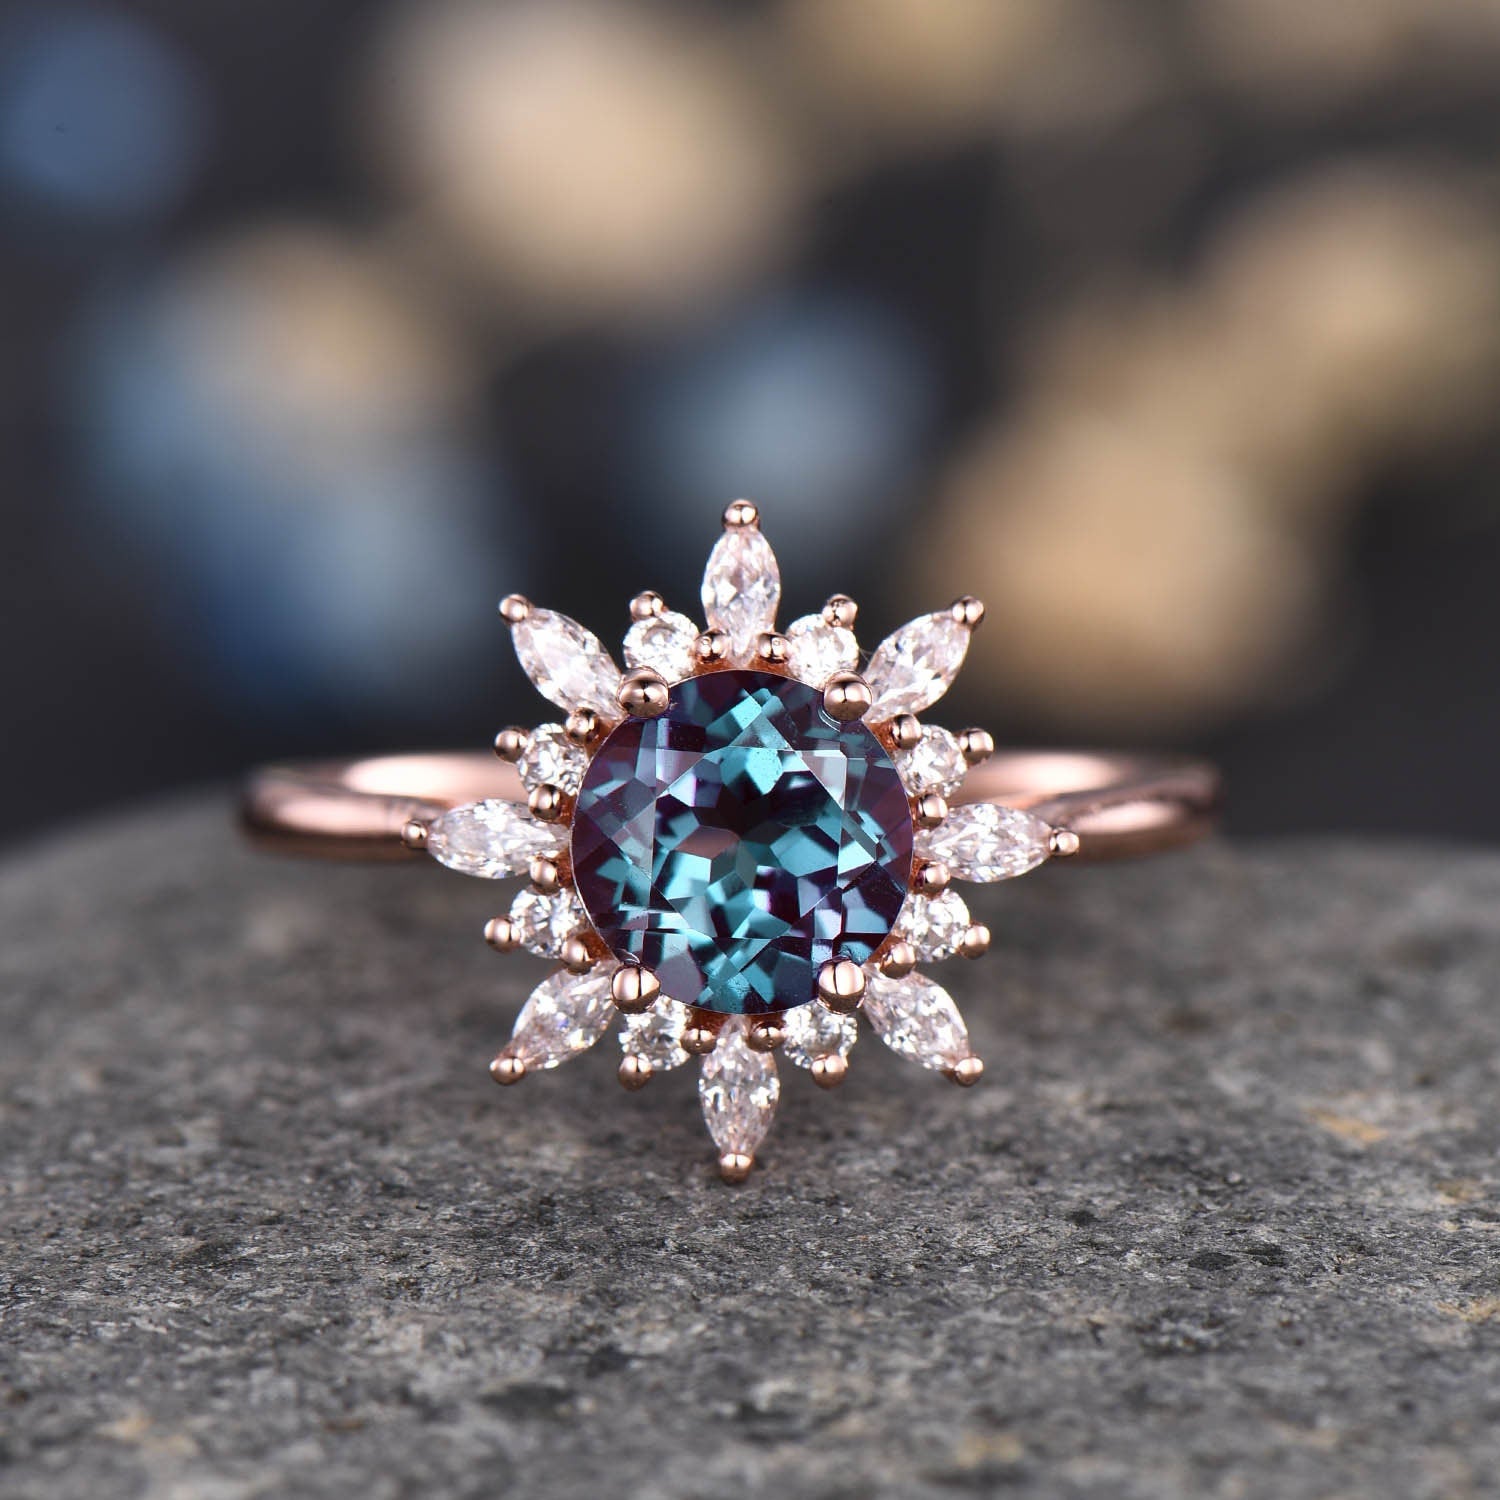 13 Best Rose Gold Engagement Ring Designs (That Will Blow Her Away)